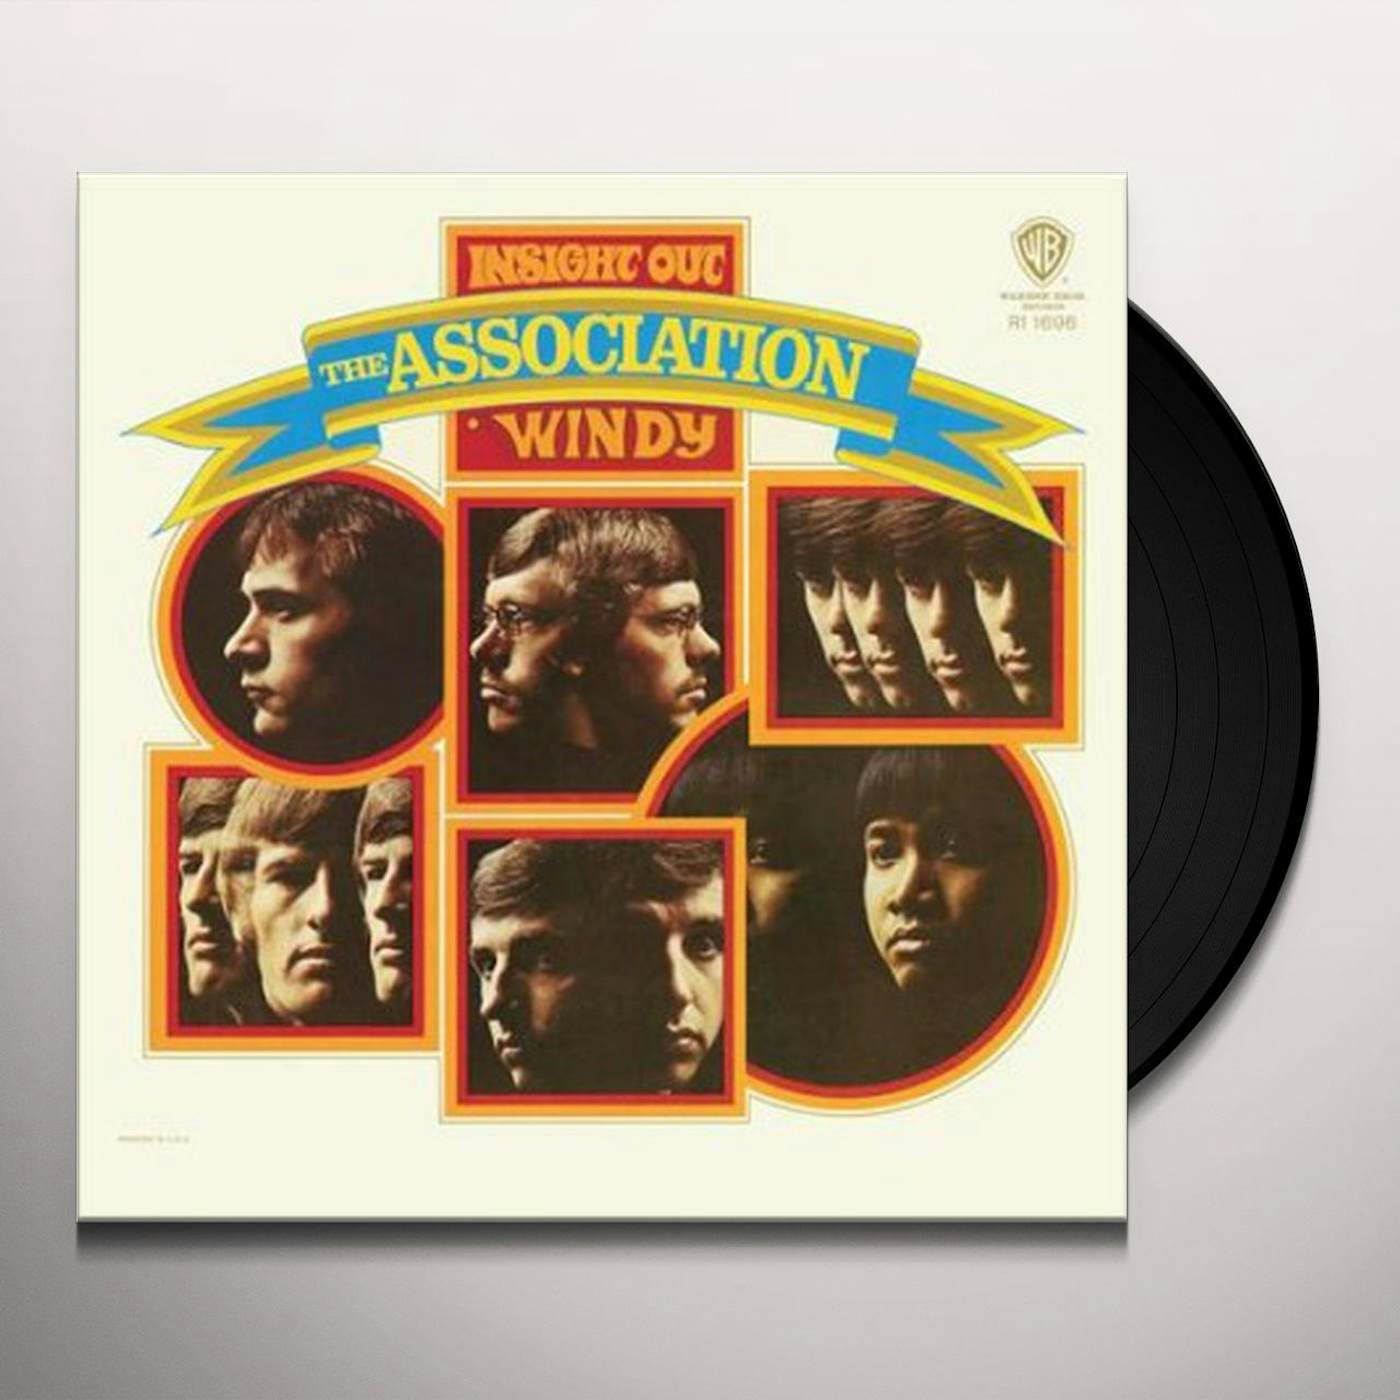 The Association Insight Out Vinyl Record